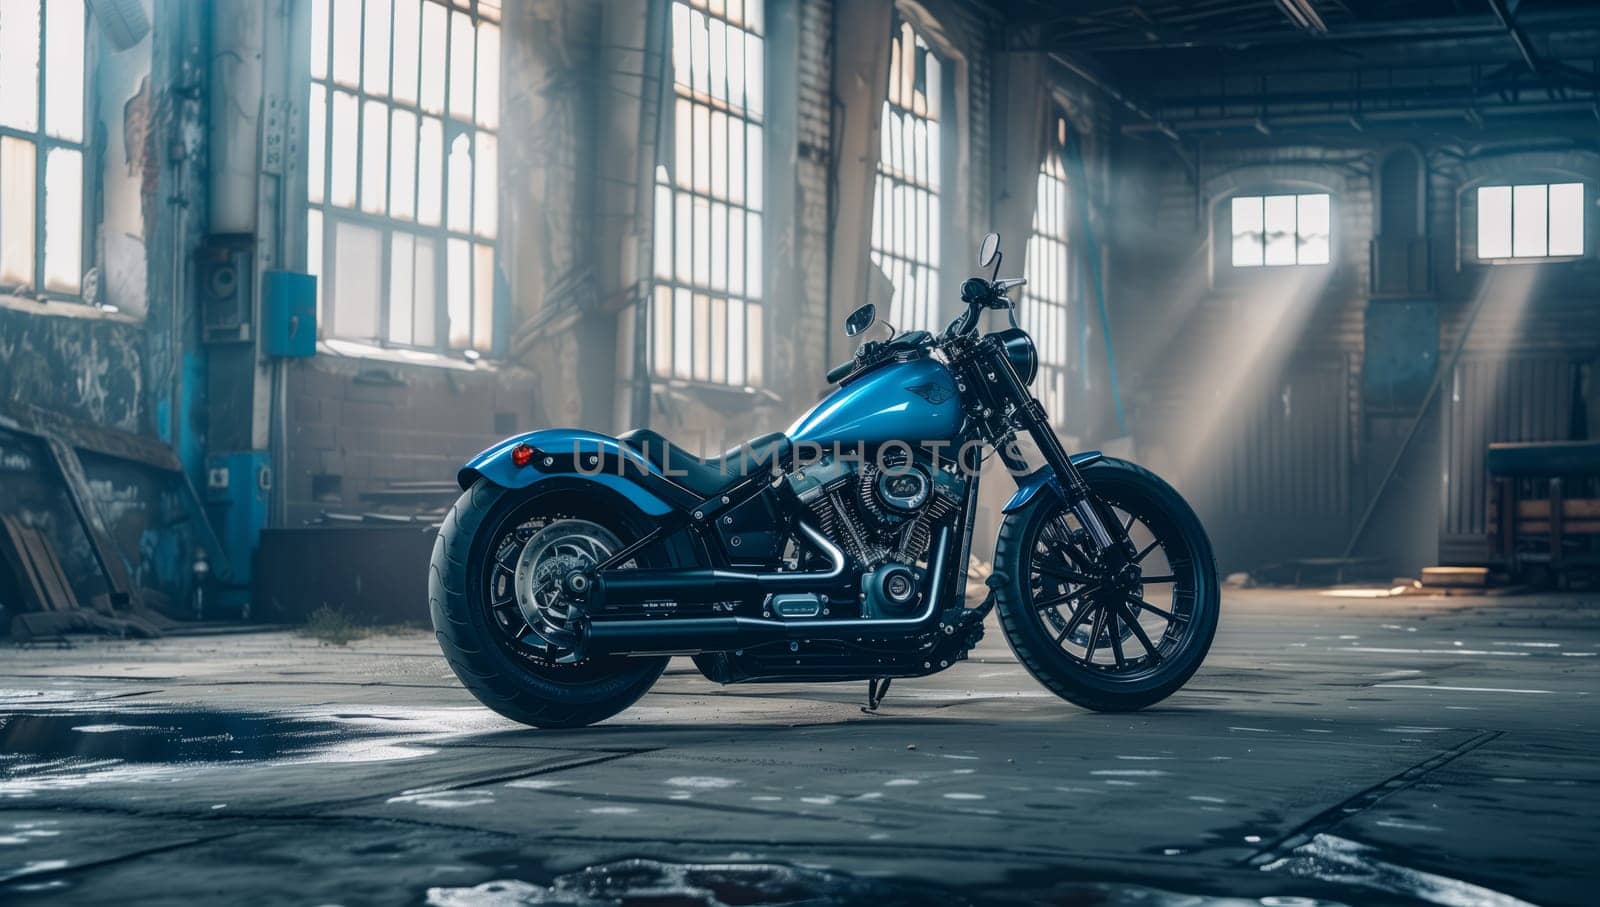 A blue Harley Davidson motorcycle sits inside a deserted building by richwolf